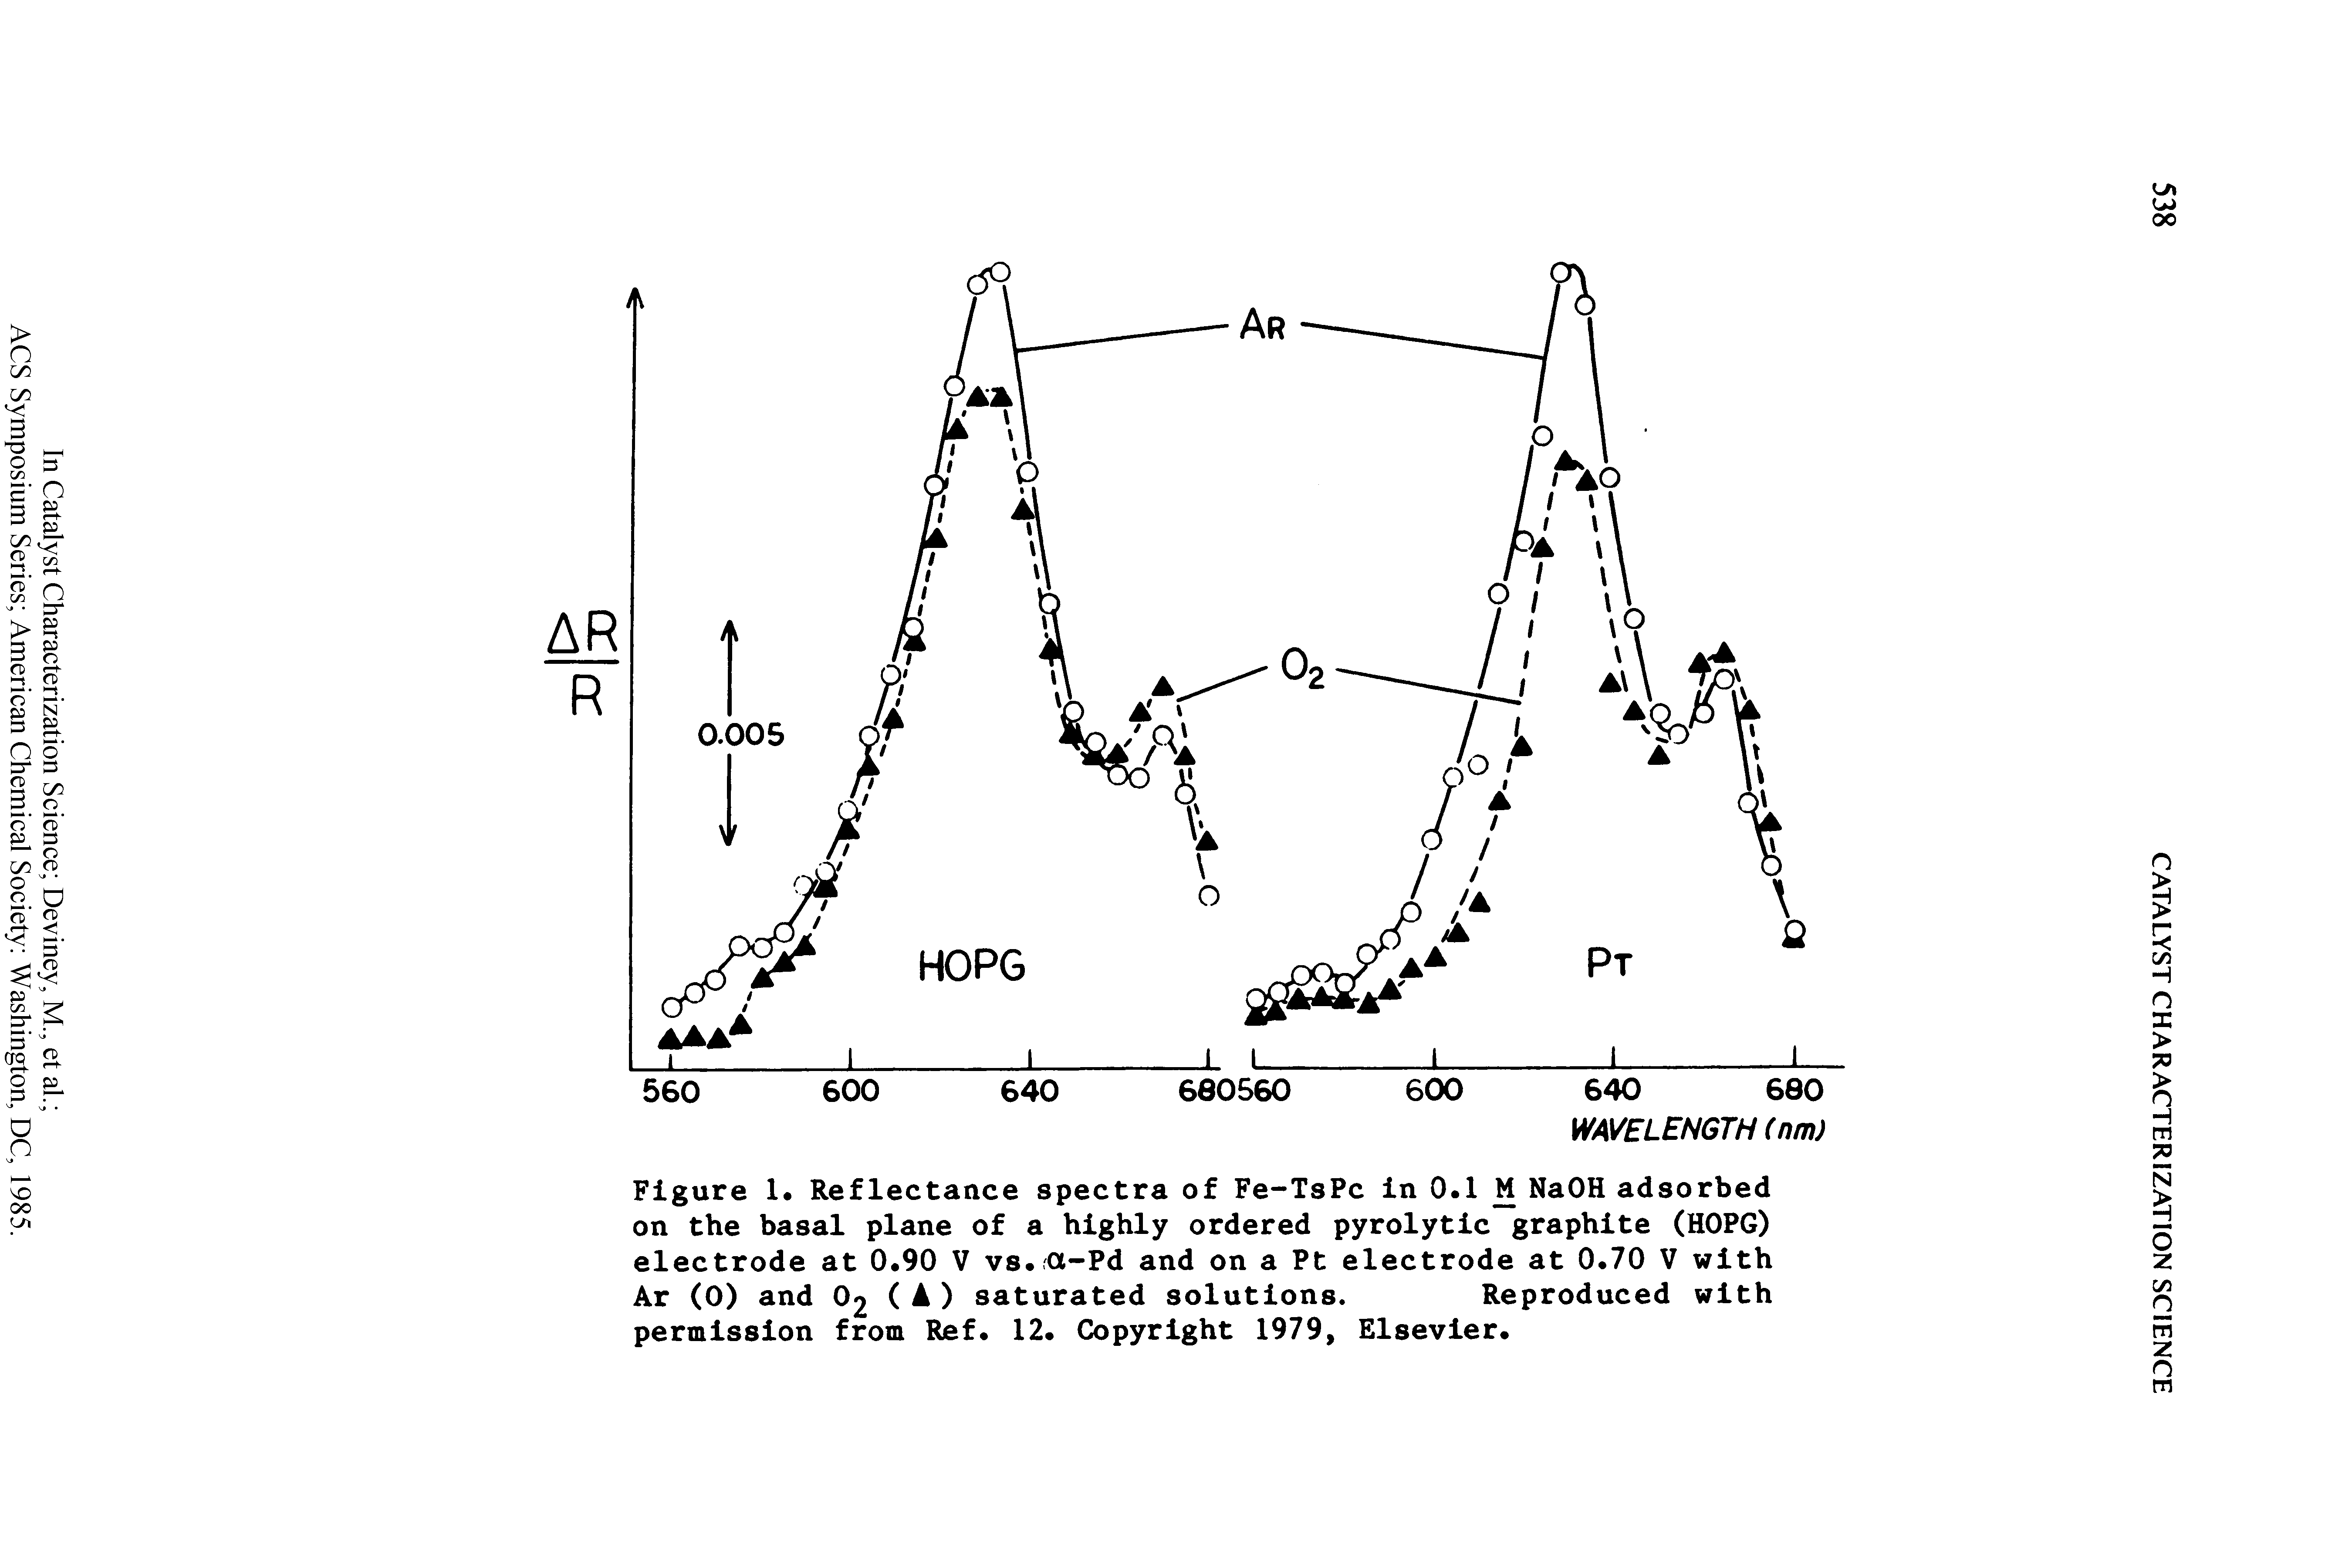 Figure 1. Reflectance spectra of Fe-TsPc in 0.1 M NaOH adsorbed on the basal plane of a highly ordered pyrolytic graphite (HOPG) electrode at 0.90 V vs. a-Pd and on a Pt electrode at 0.70 V with Ar (0) and O2 ( A ) saturated solutions. Reproduced with...